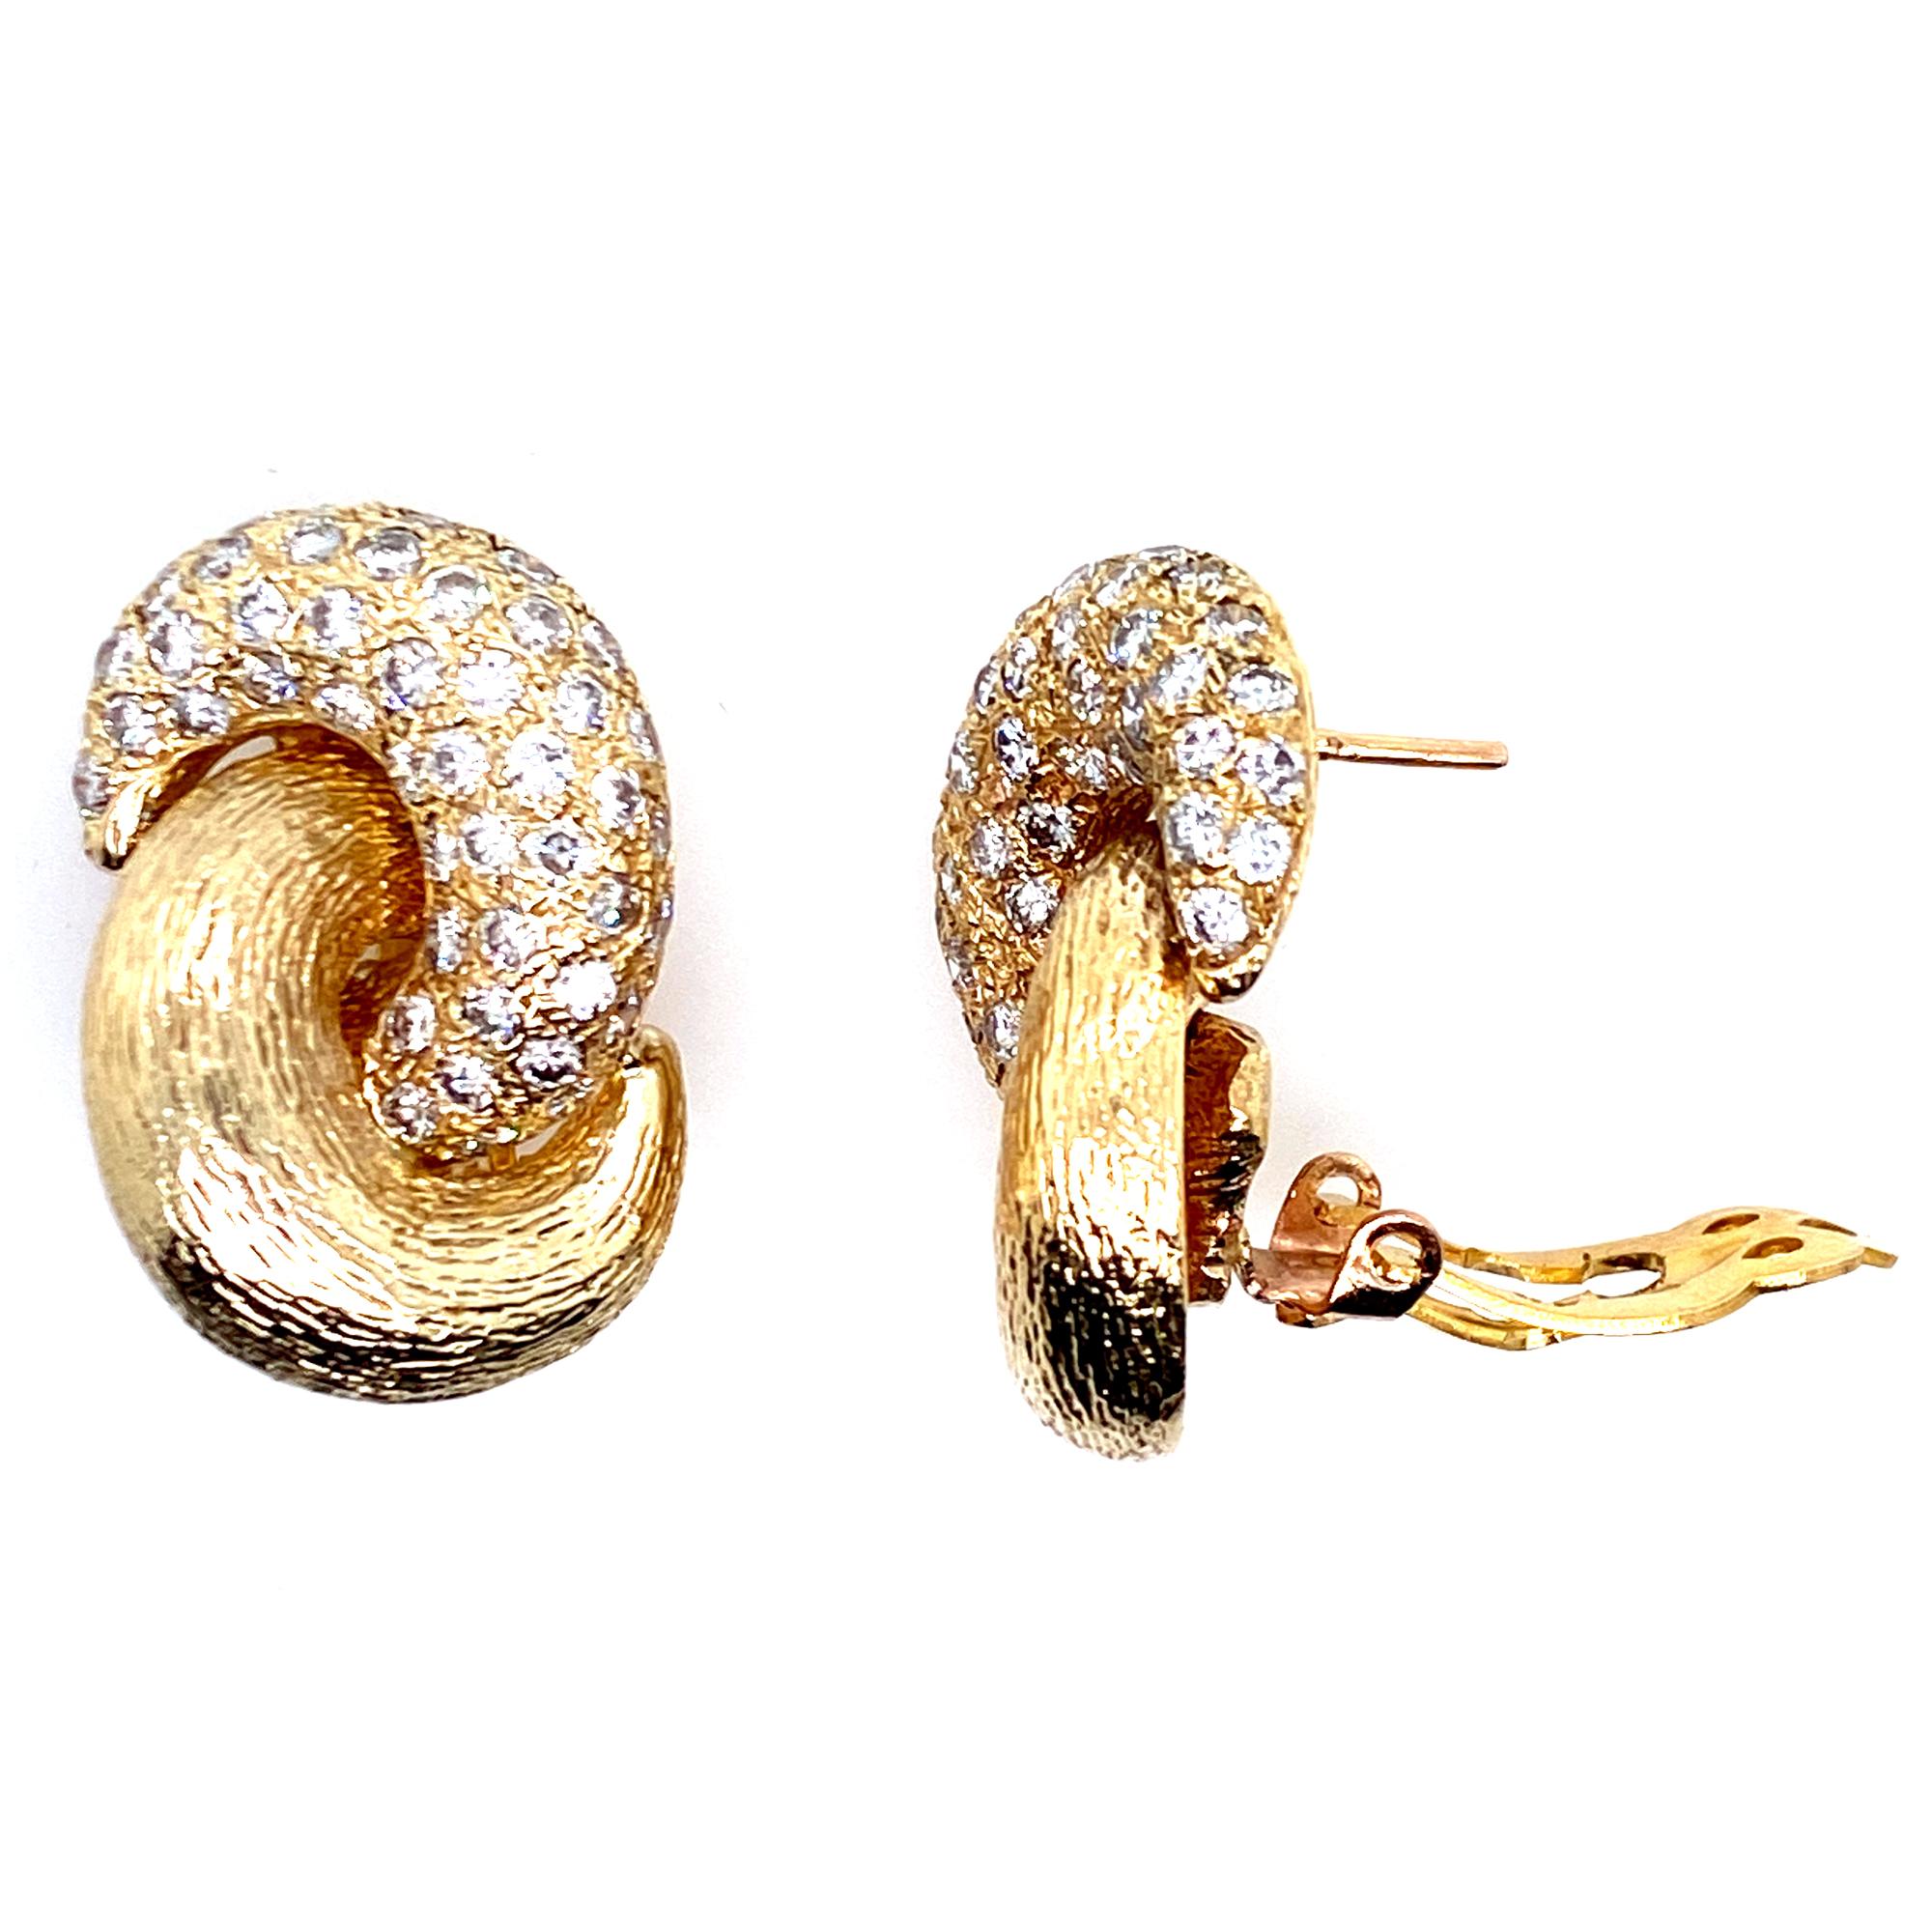 Gorgeous 1960's diamond knot earrings hand crafted in 14 karat yellow gold. The top knots feature 104 round brilliant cut white diamonds (5.00 CTW), graded F-G color and VS clarity. The earrings measure 20 x 30mm. 